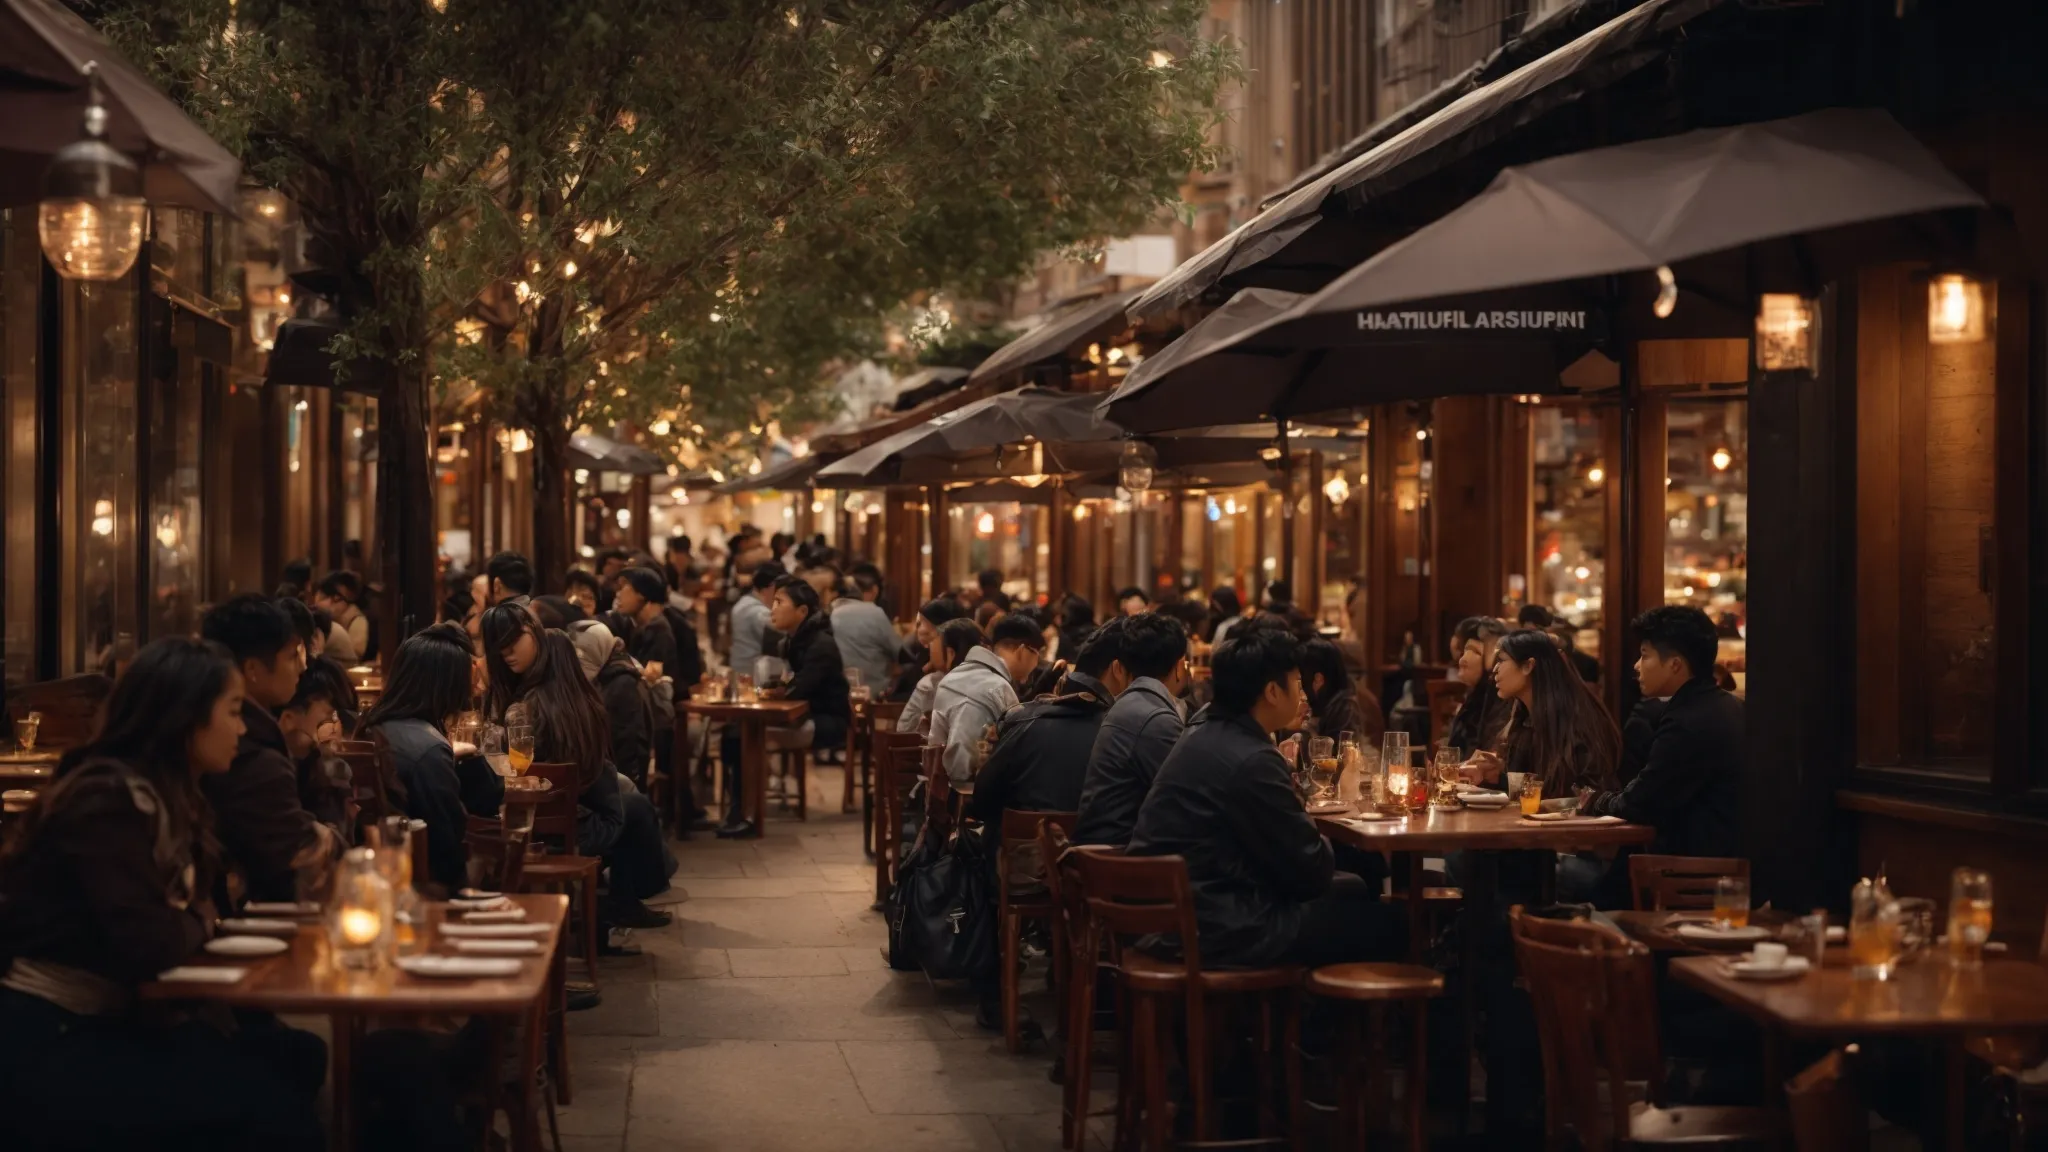 a bustling street-view of diverse eateries with visible outdoor seating and patrons dining under warm lighting.